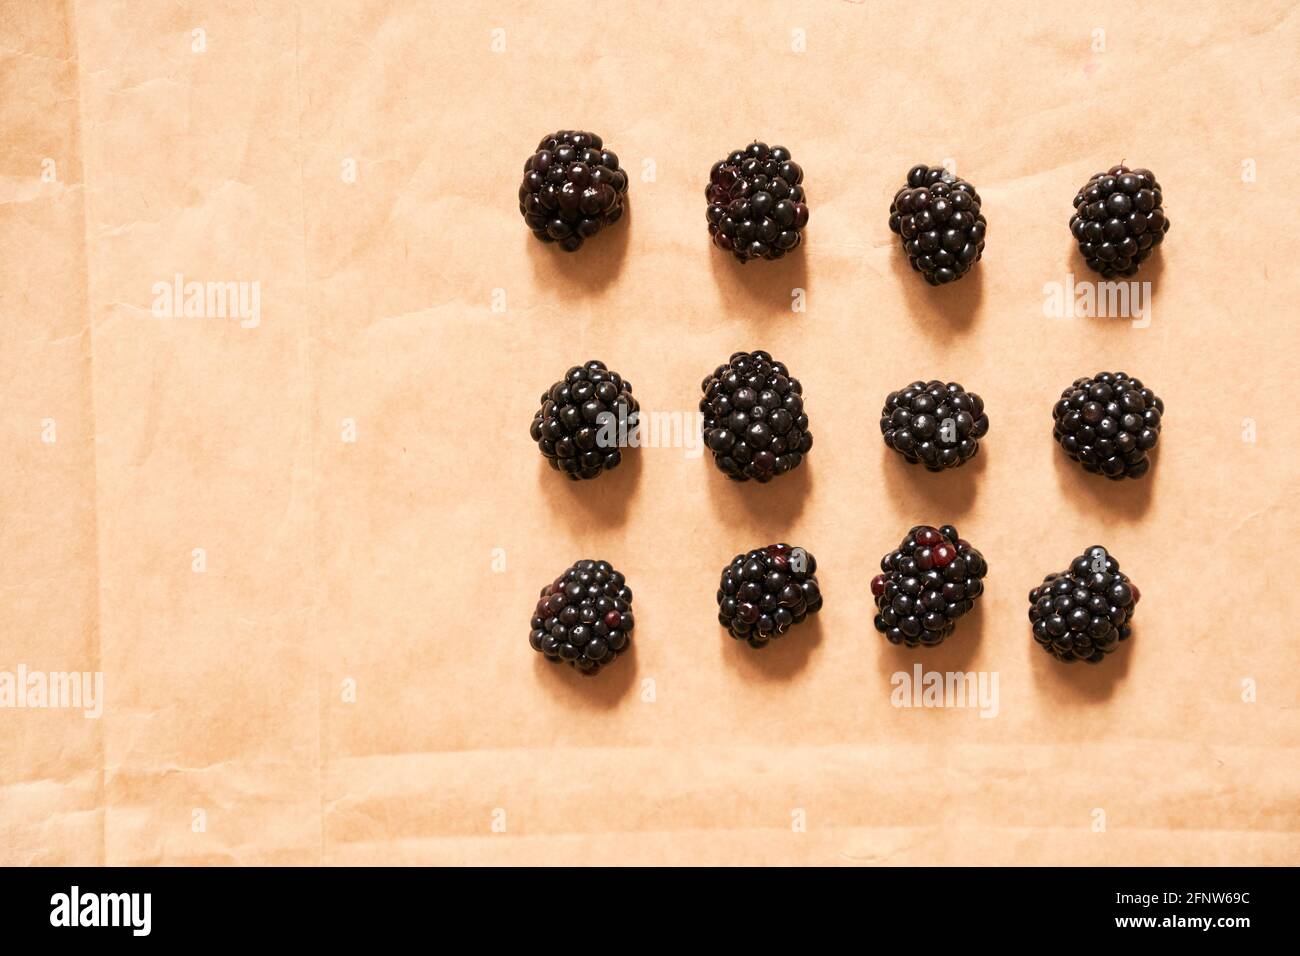 Twelve blackberries on a beige craft paper background. Berries laid out in the form of a rectangle. Horizontal card with copy space. Healthy, delicious, natural vegetarian background. Stock Photo